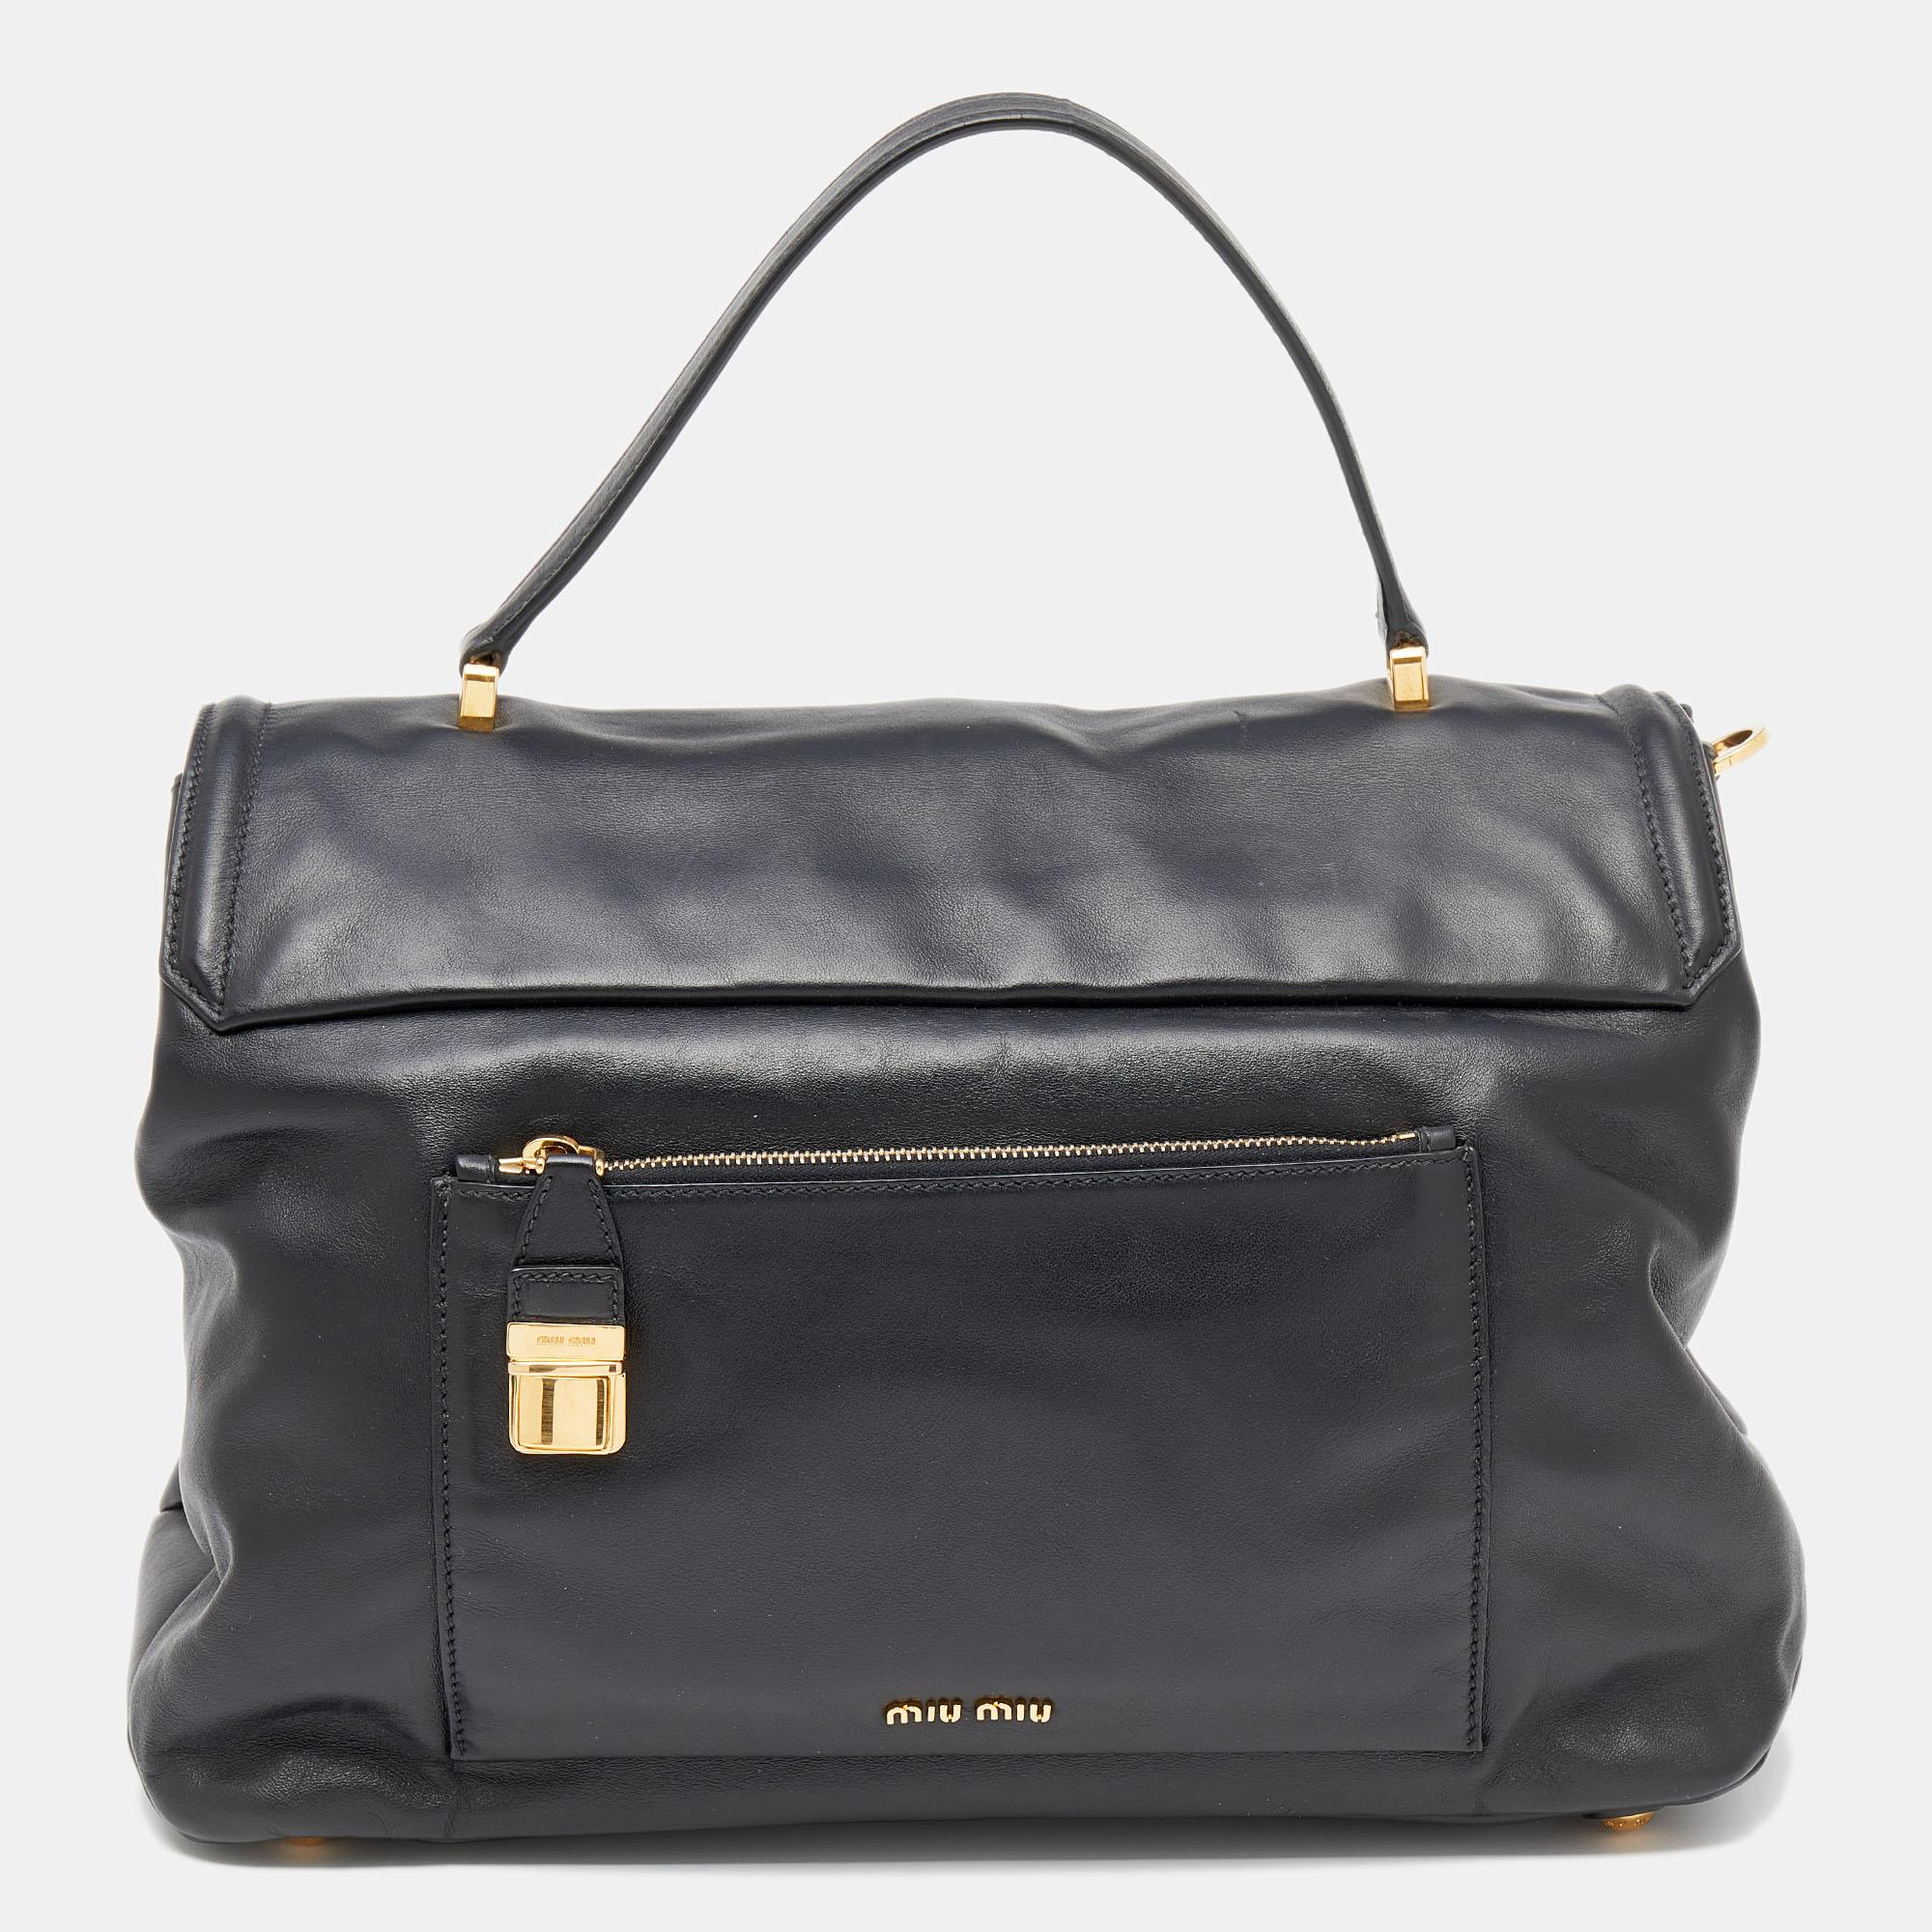 Miu Miu delivers a classy everyday bag crafted from black Vitello soft leather and gold-tone hardware. It is spaciously sized to hold the things you need for your daily commute or travel escapades. The bag suspends from a top handle and a bag